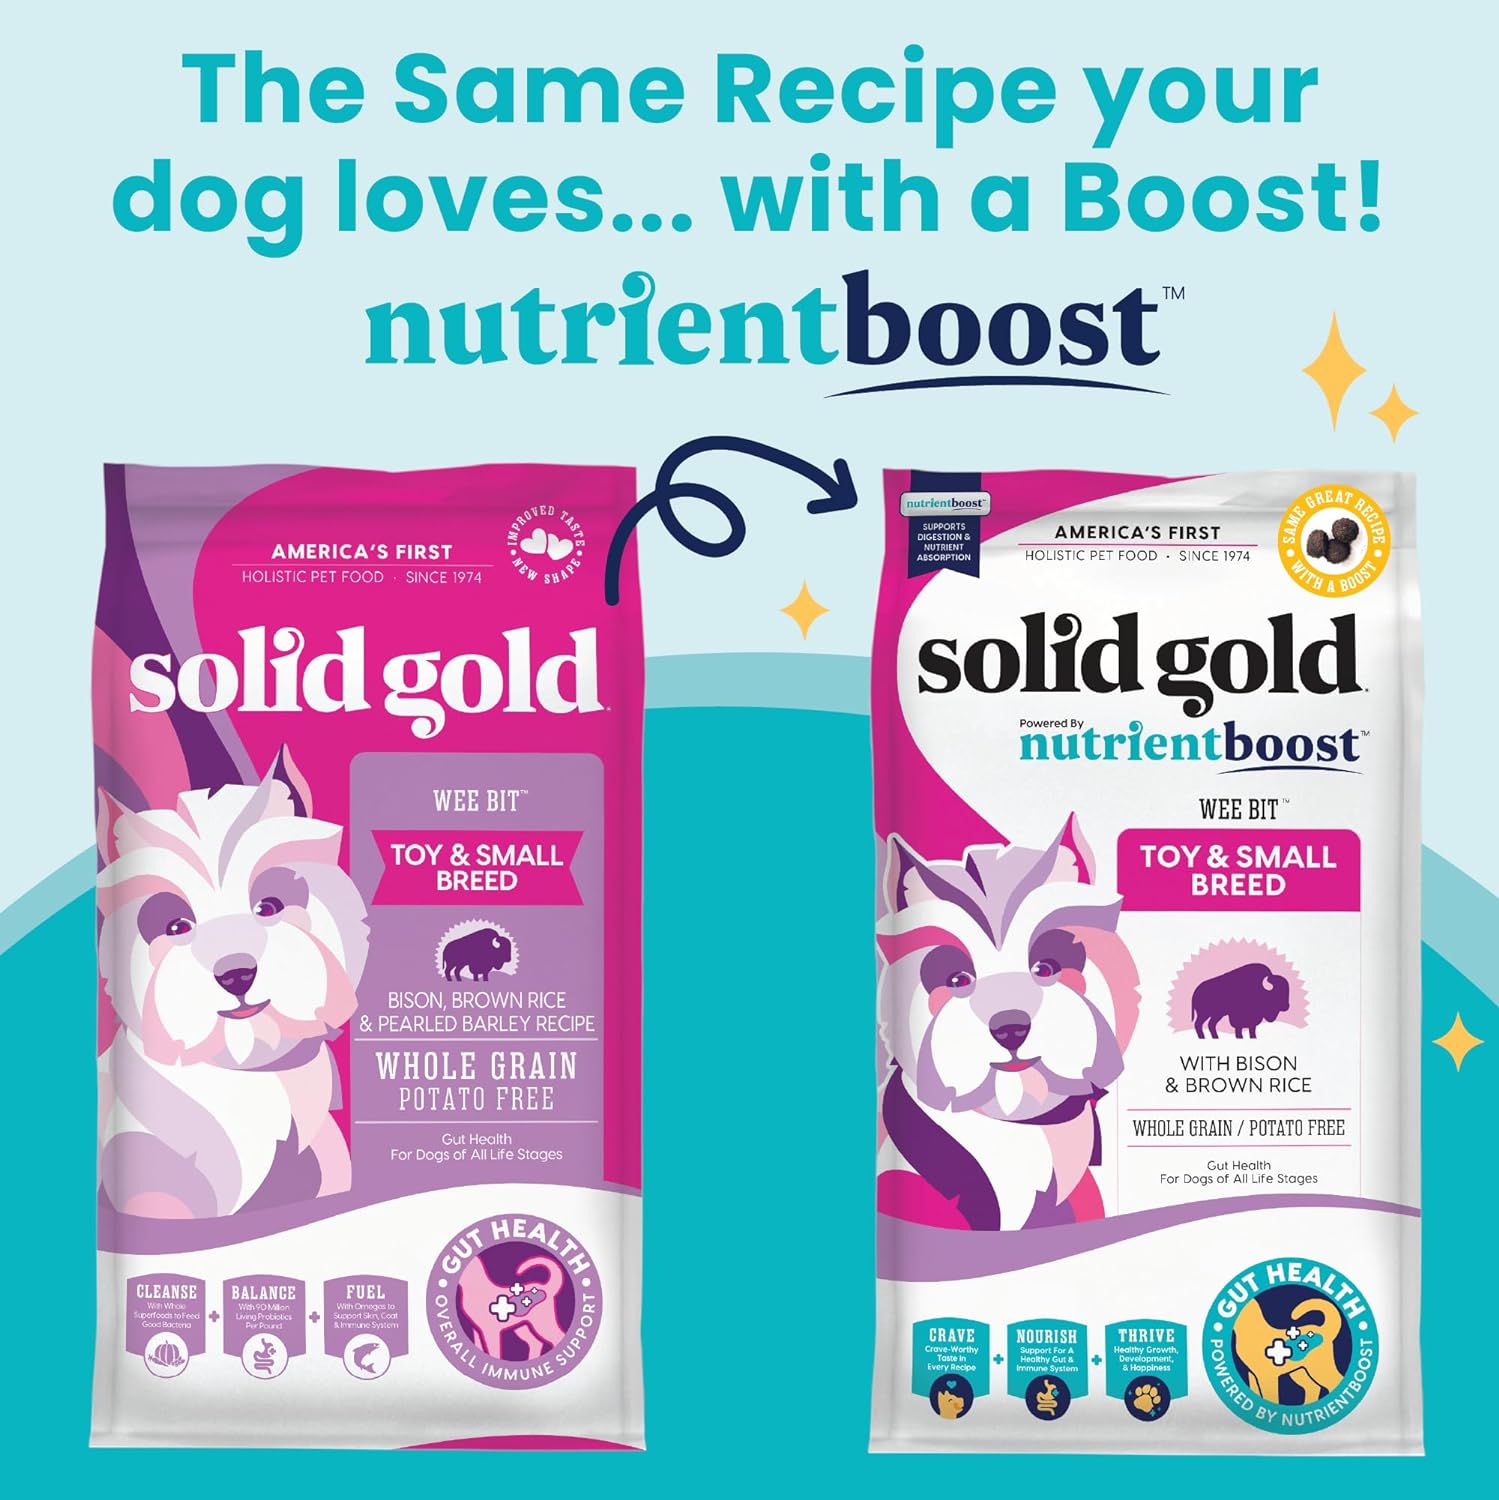 Solid Gold Small Breed Dog Food - Nutrientboost Wee Bit Whole Grain Made w\/Real Bison, Brown Rice, & Pearled Barley - High Fiber, Probiotic Dry Dog Food for Dogs with Sensitive Stomachs - 11 LB